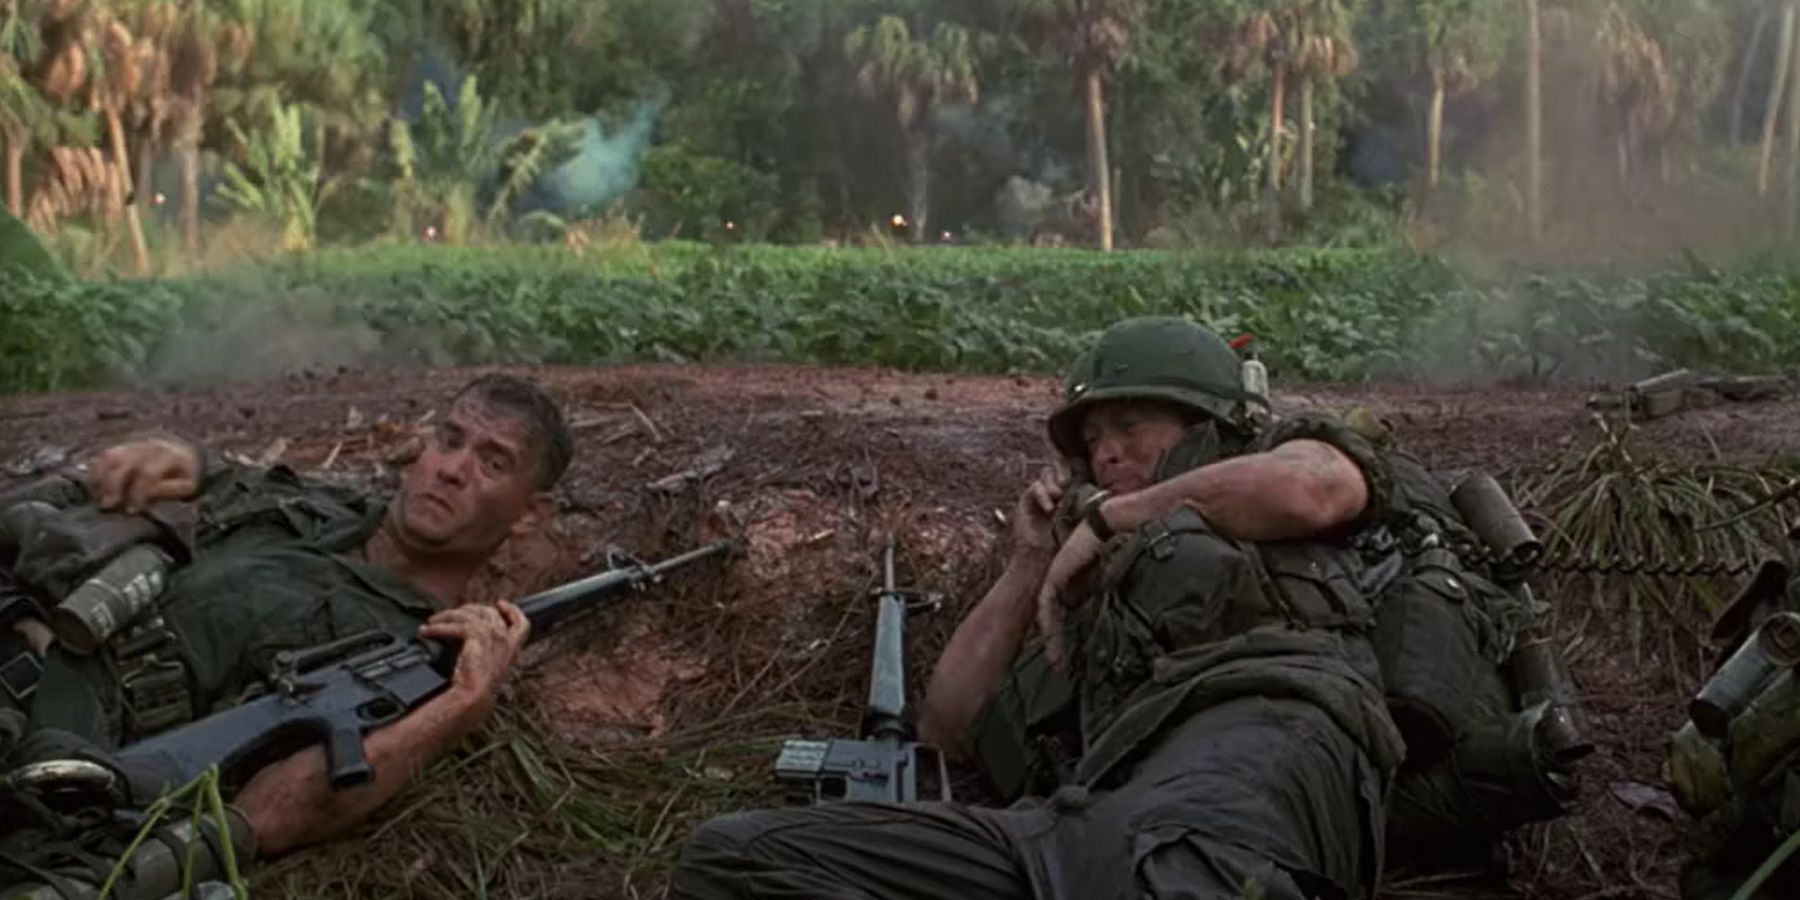 Forrest and other soldiers ducking in a fox hole in Vietnam in Forrest Gump